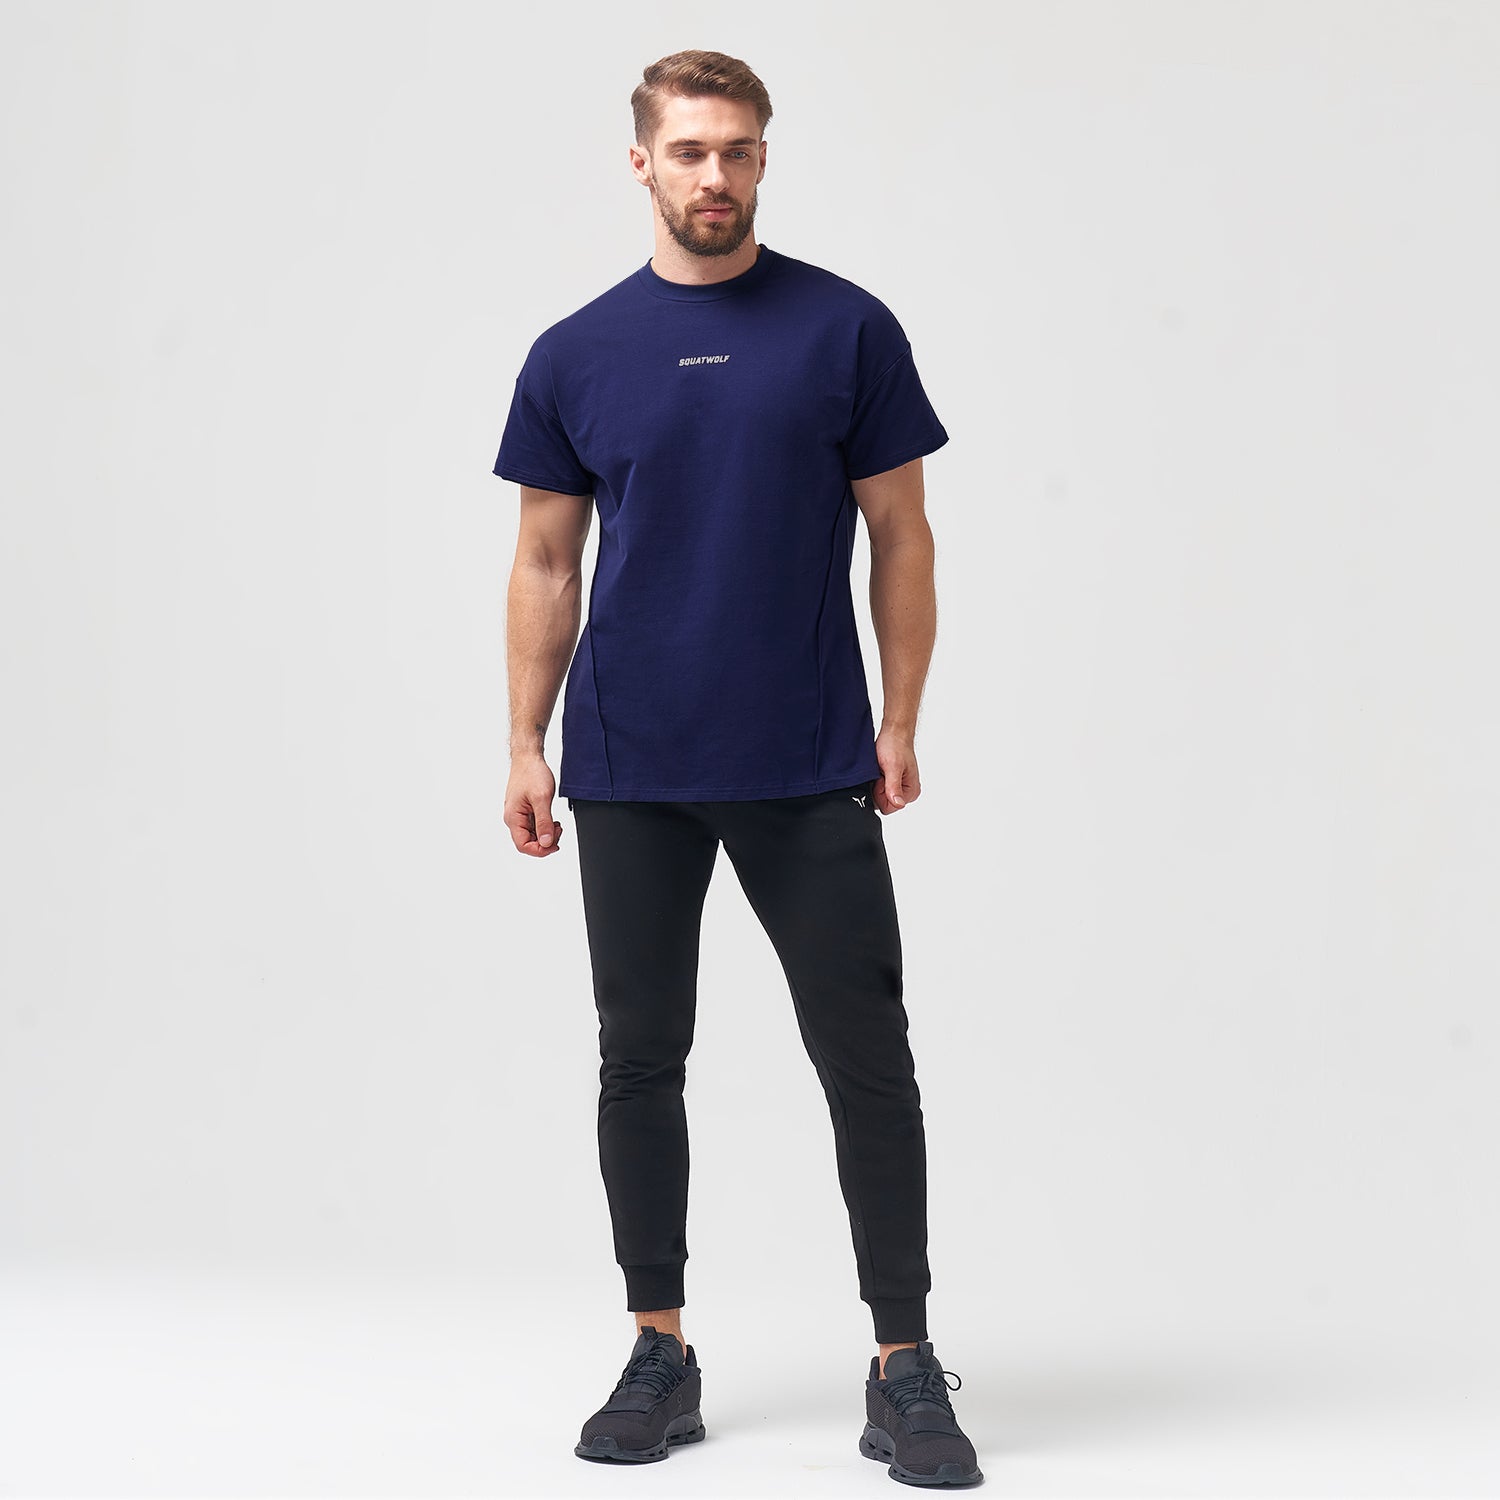 squatwolf-gym-wear-bodybuilding-tee-navy-workout-shirts-for-men